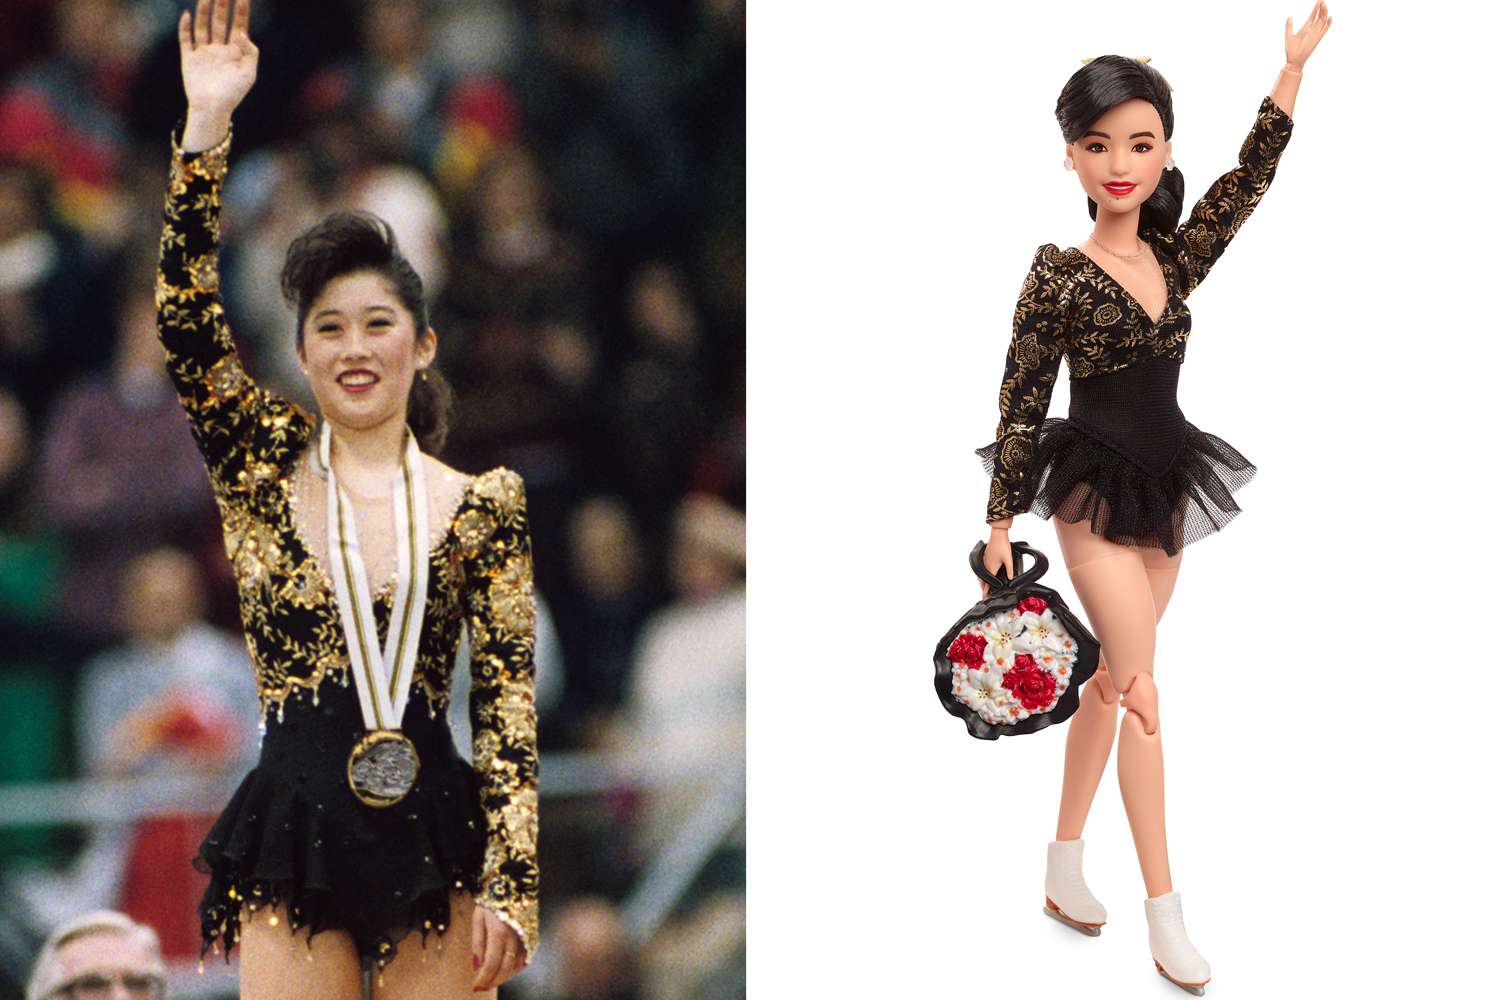 Kristi Yamaguchi of the United States wins a gold medal at the 1992 Winter Olympics in Albertville, France; Kristi Yamaguchi Gets a Barbie in Her Likeness for AAPI Heritage Month 